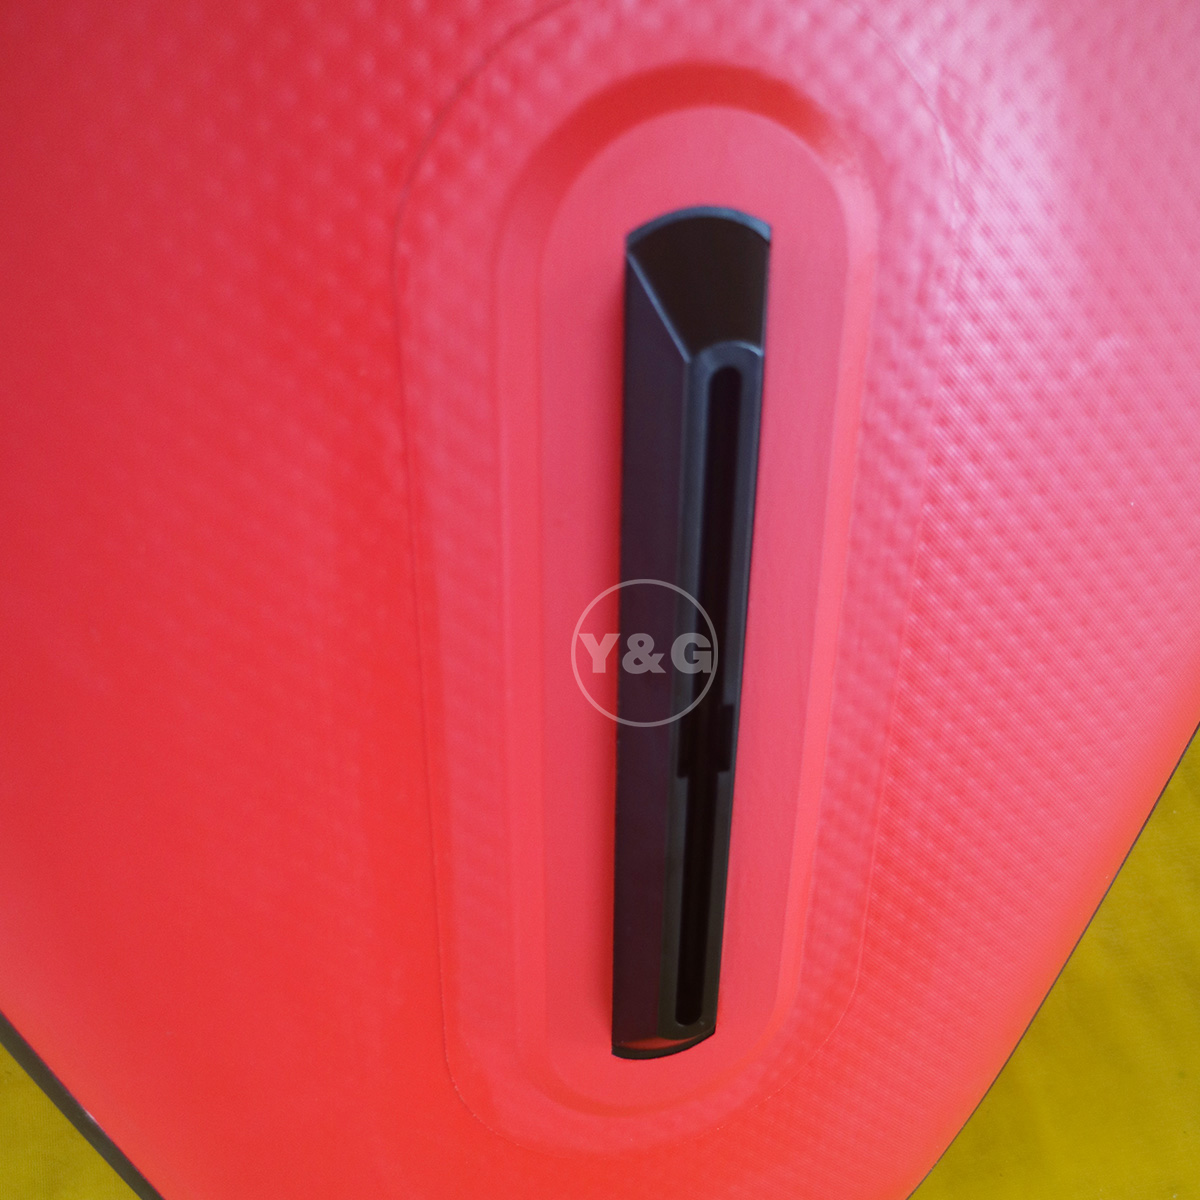 Red Inflatable Paddle BoardYPD-77